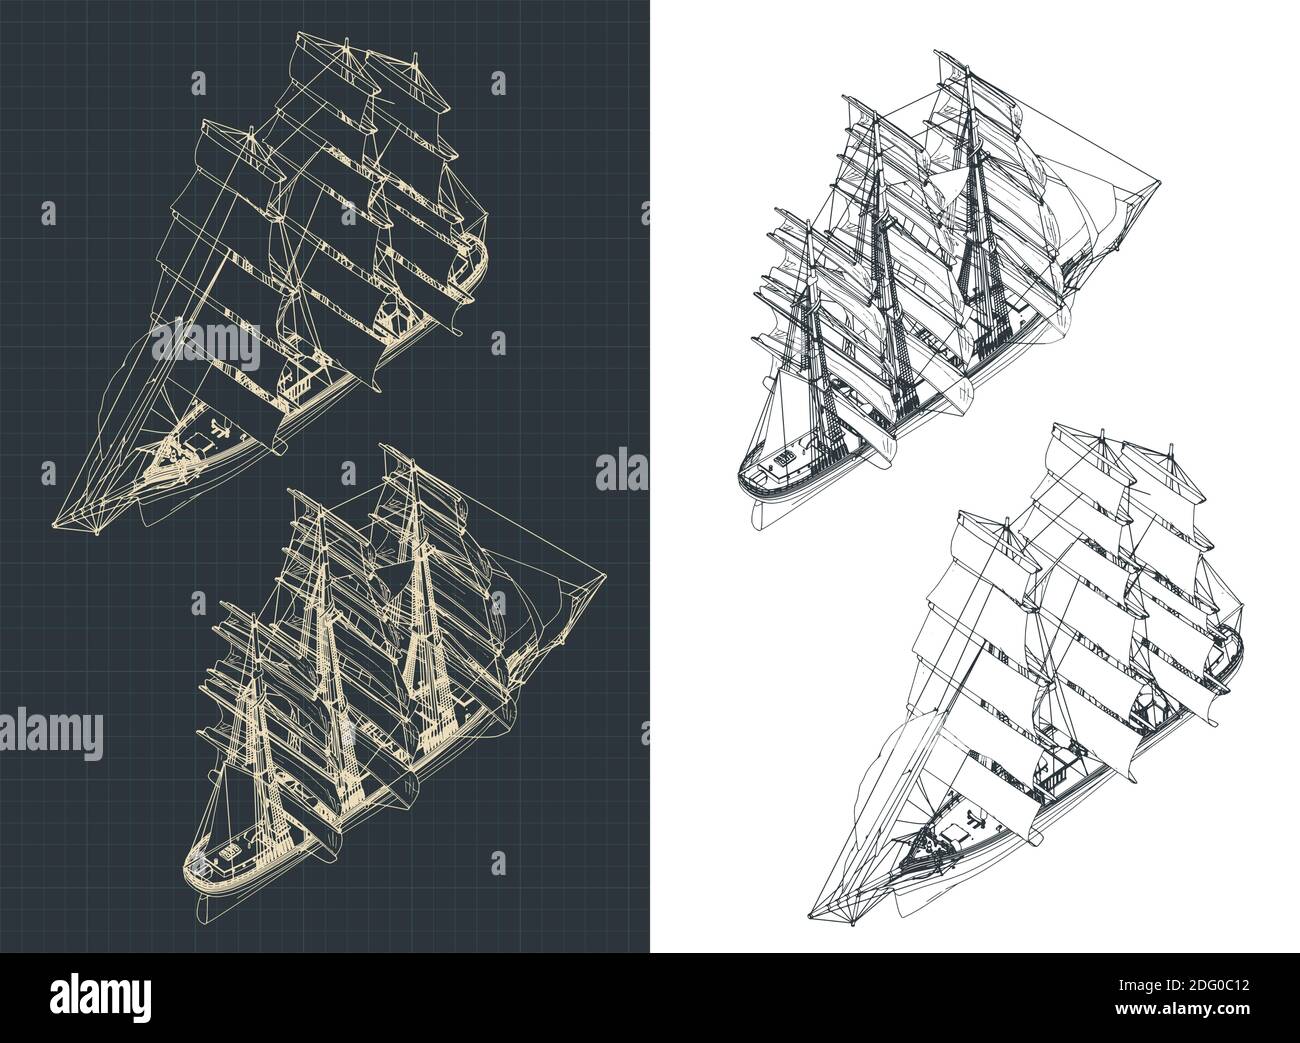 Stylized vector illustration of a large three-masted sailing ship isometric drawings Stock Vector